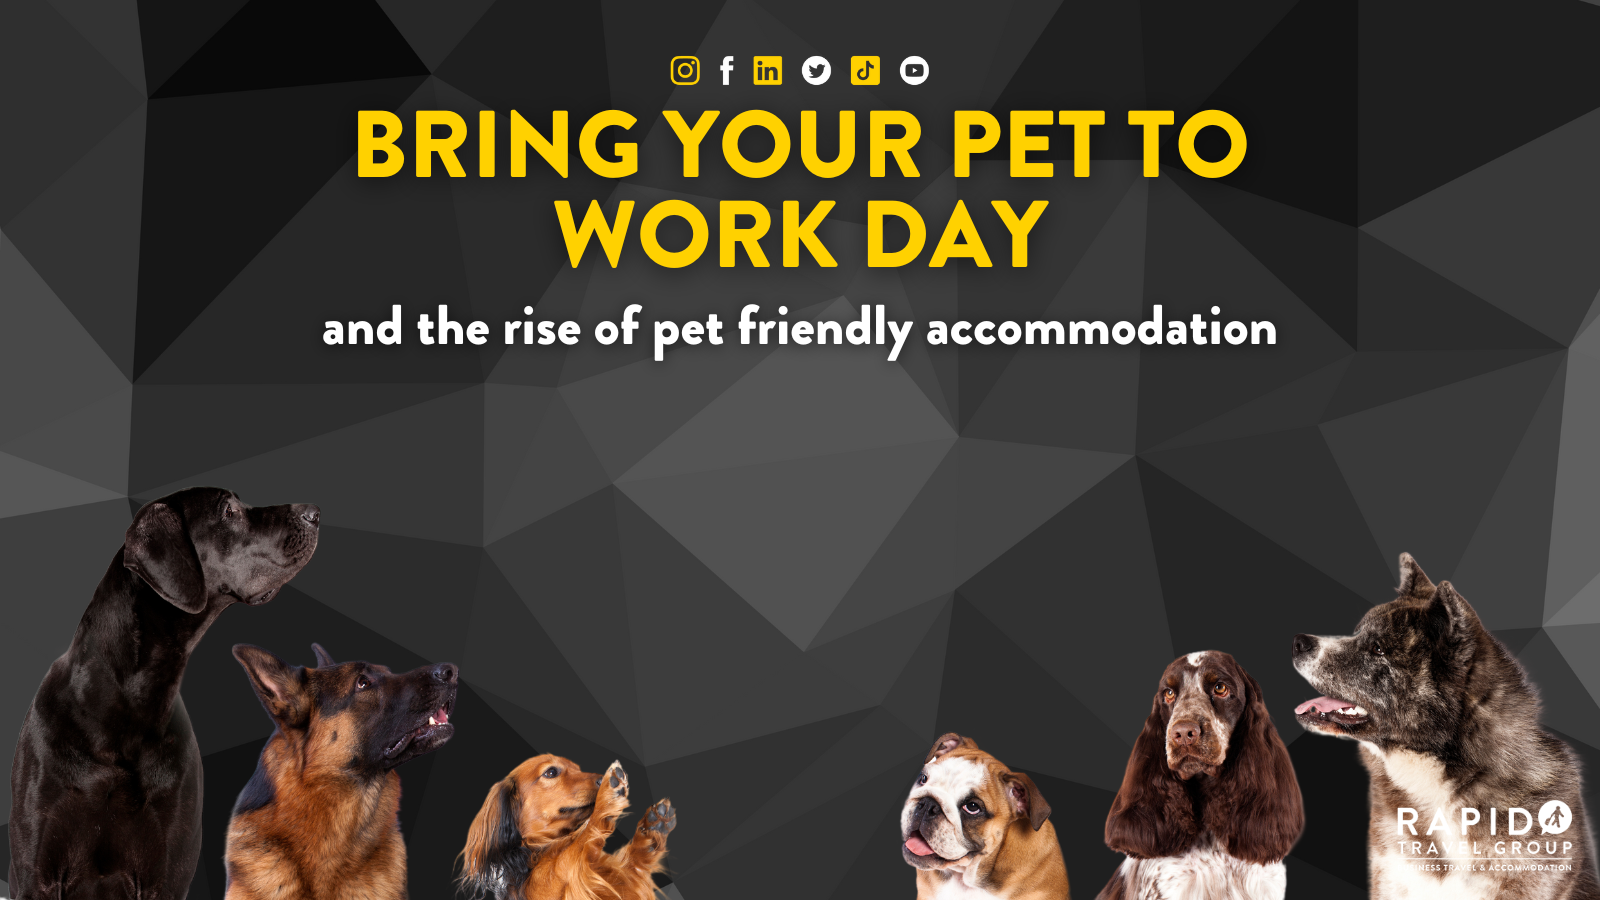 Bring your pet to work day and the rise of pret friendly accommodation